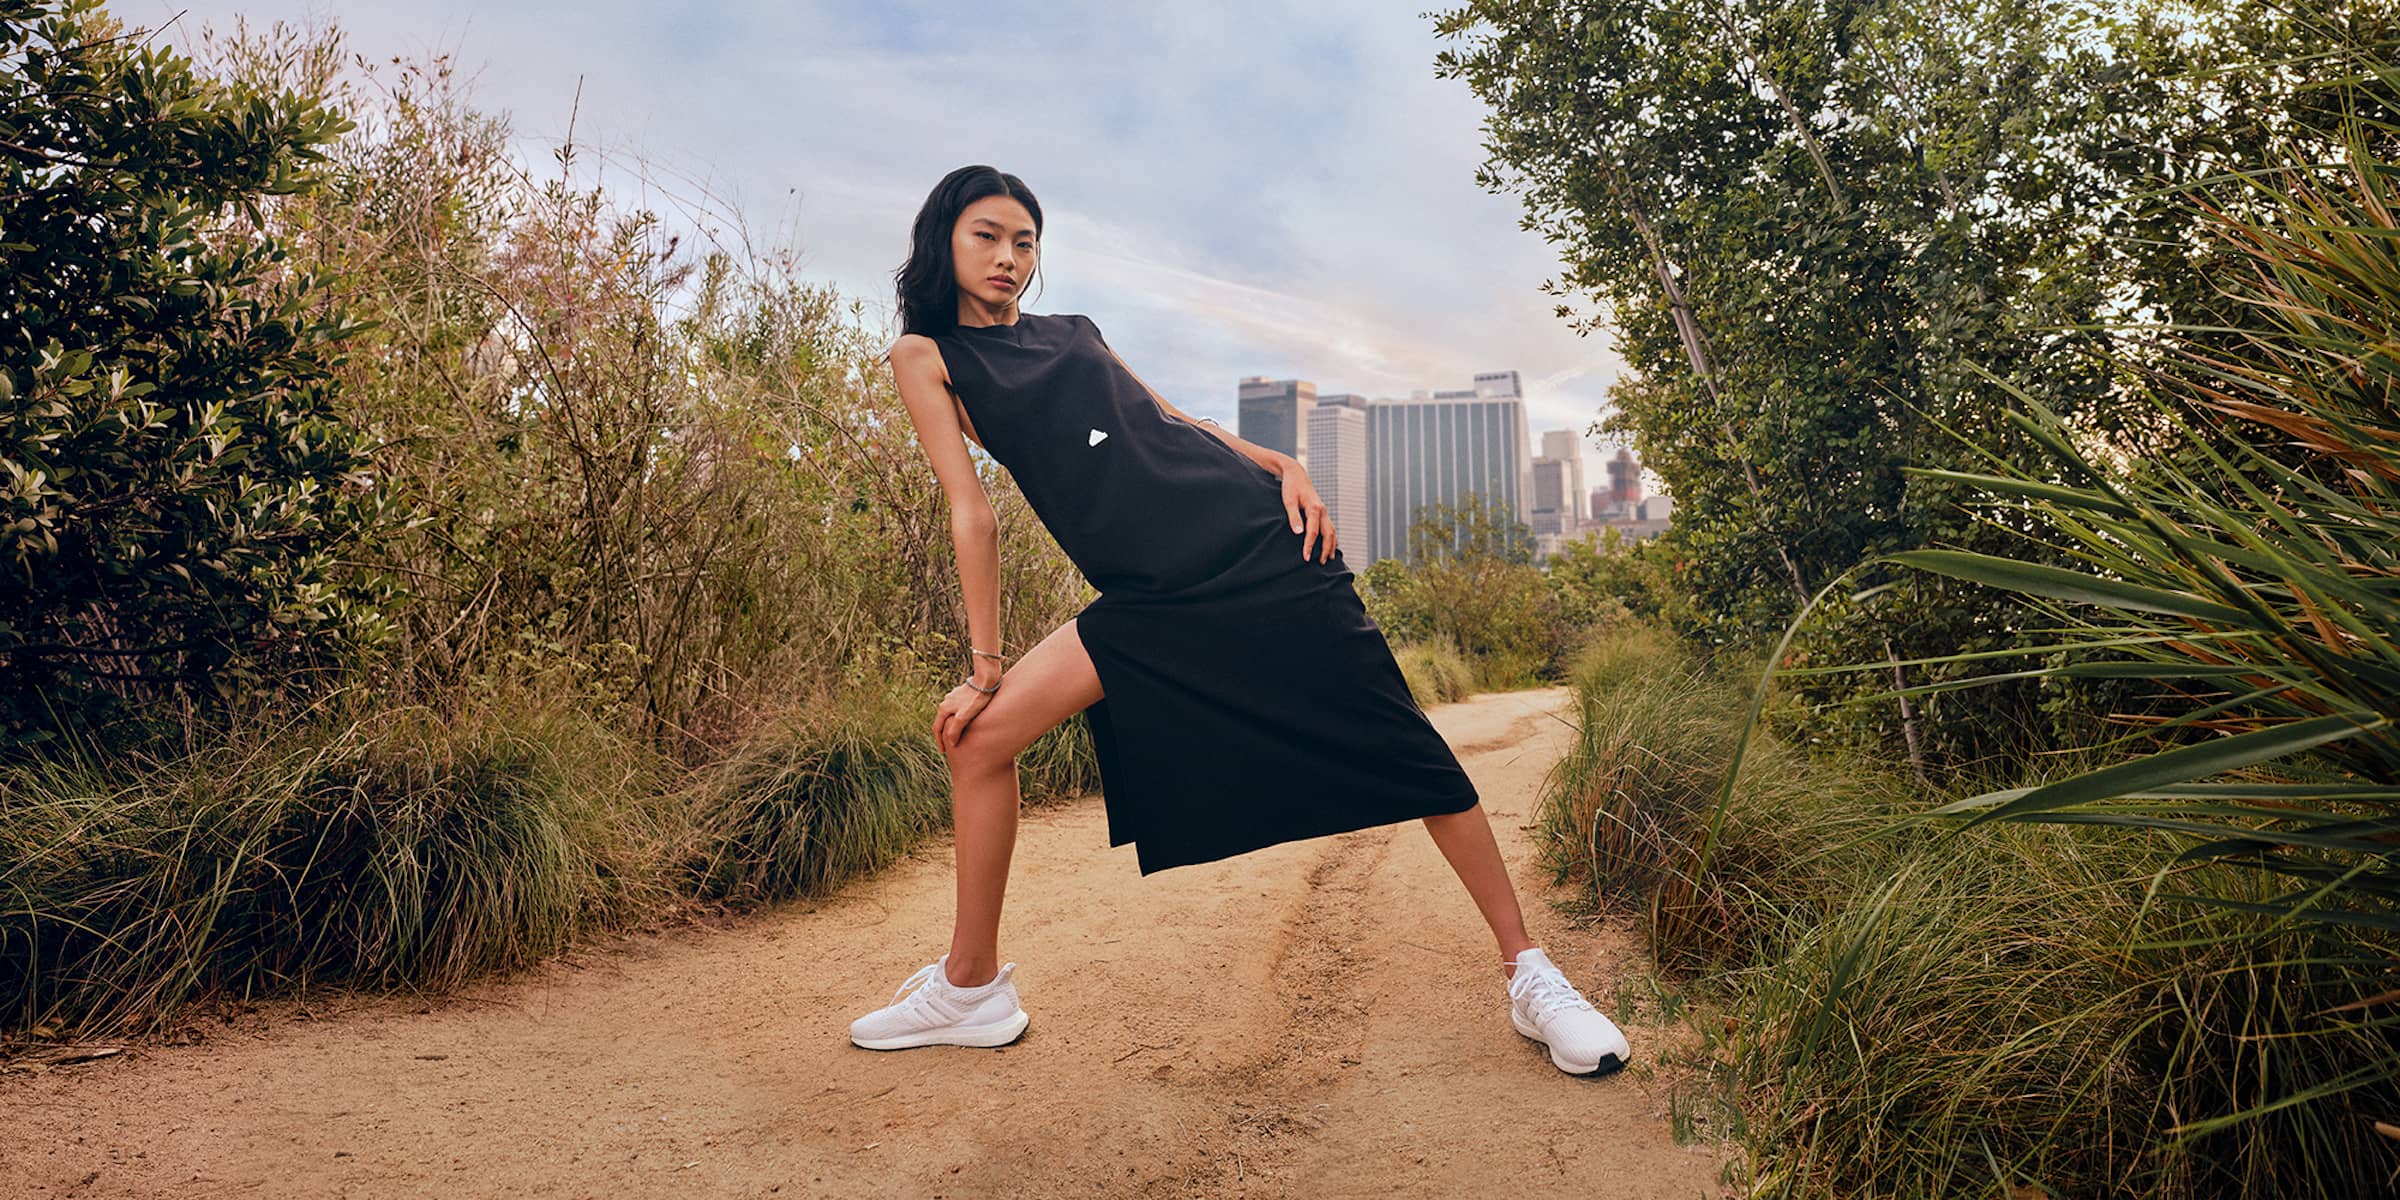 Adidas launches new sportswear capsule, fronted by hoyeon, nia dennis, xie zhenye, and tua tagovailoa